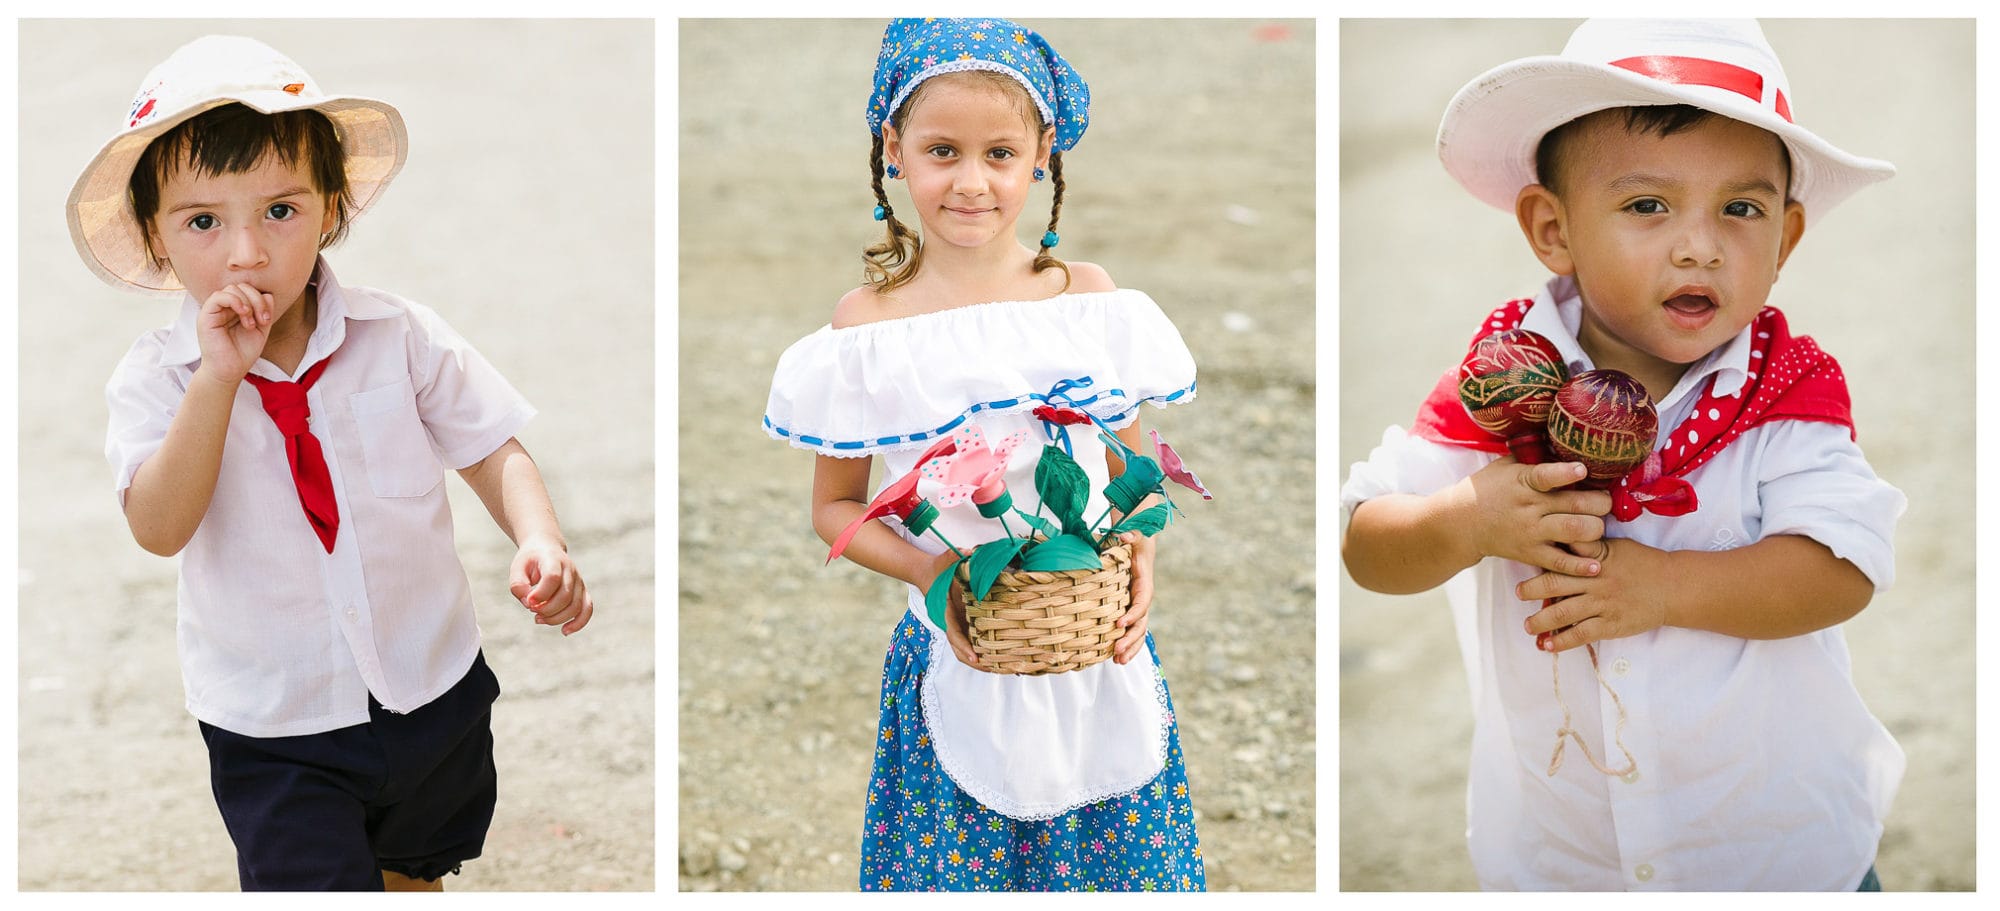 Kids in traditional outfits in Costa Rica